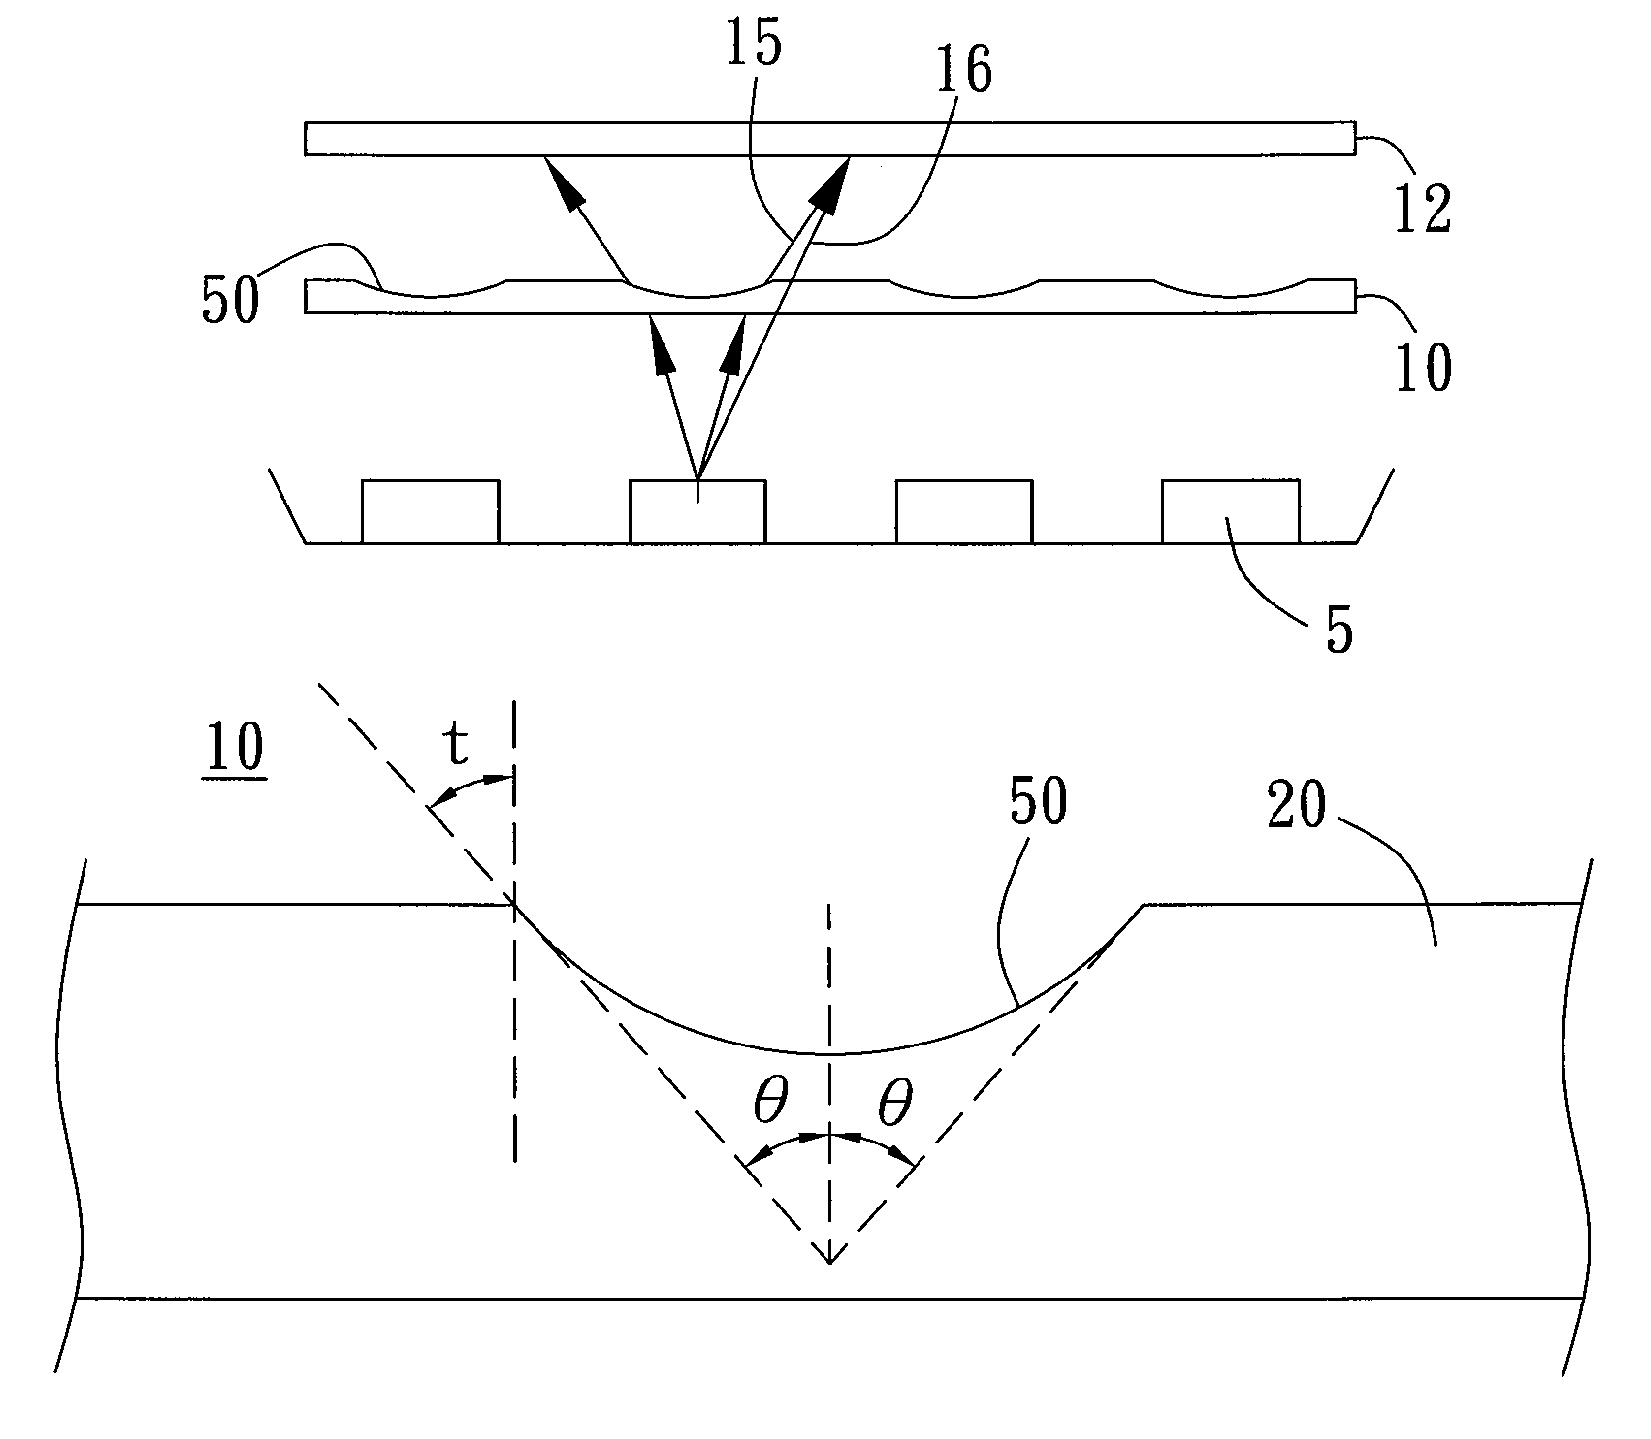 Diffuser having optical structures